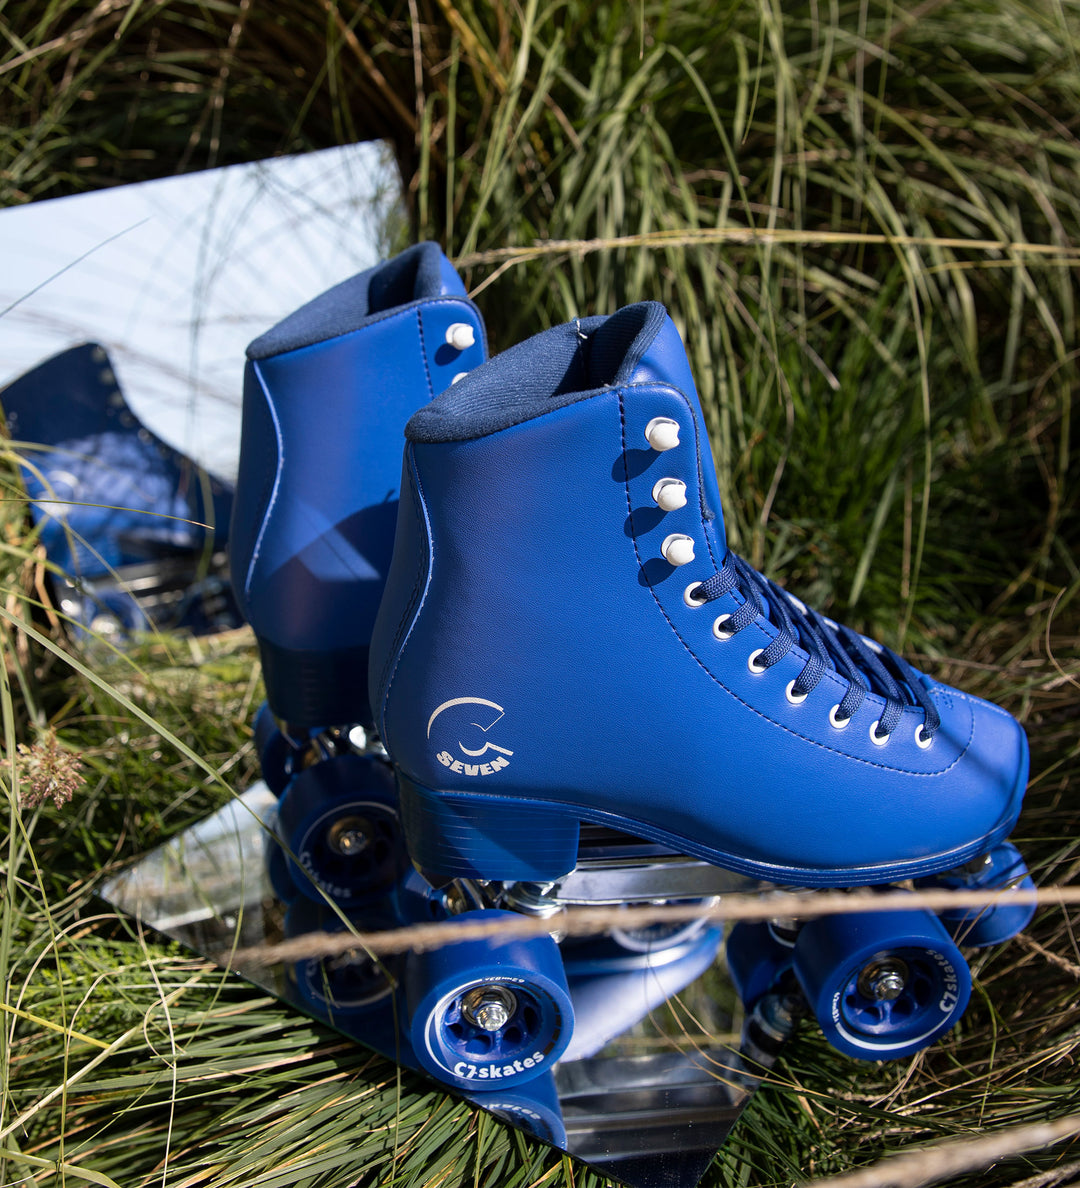 The deep blue Midsummer’s Eve Quad Skates feature removable toe stops, 62mm 83A wheels and a structured boot. 